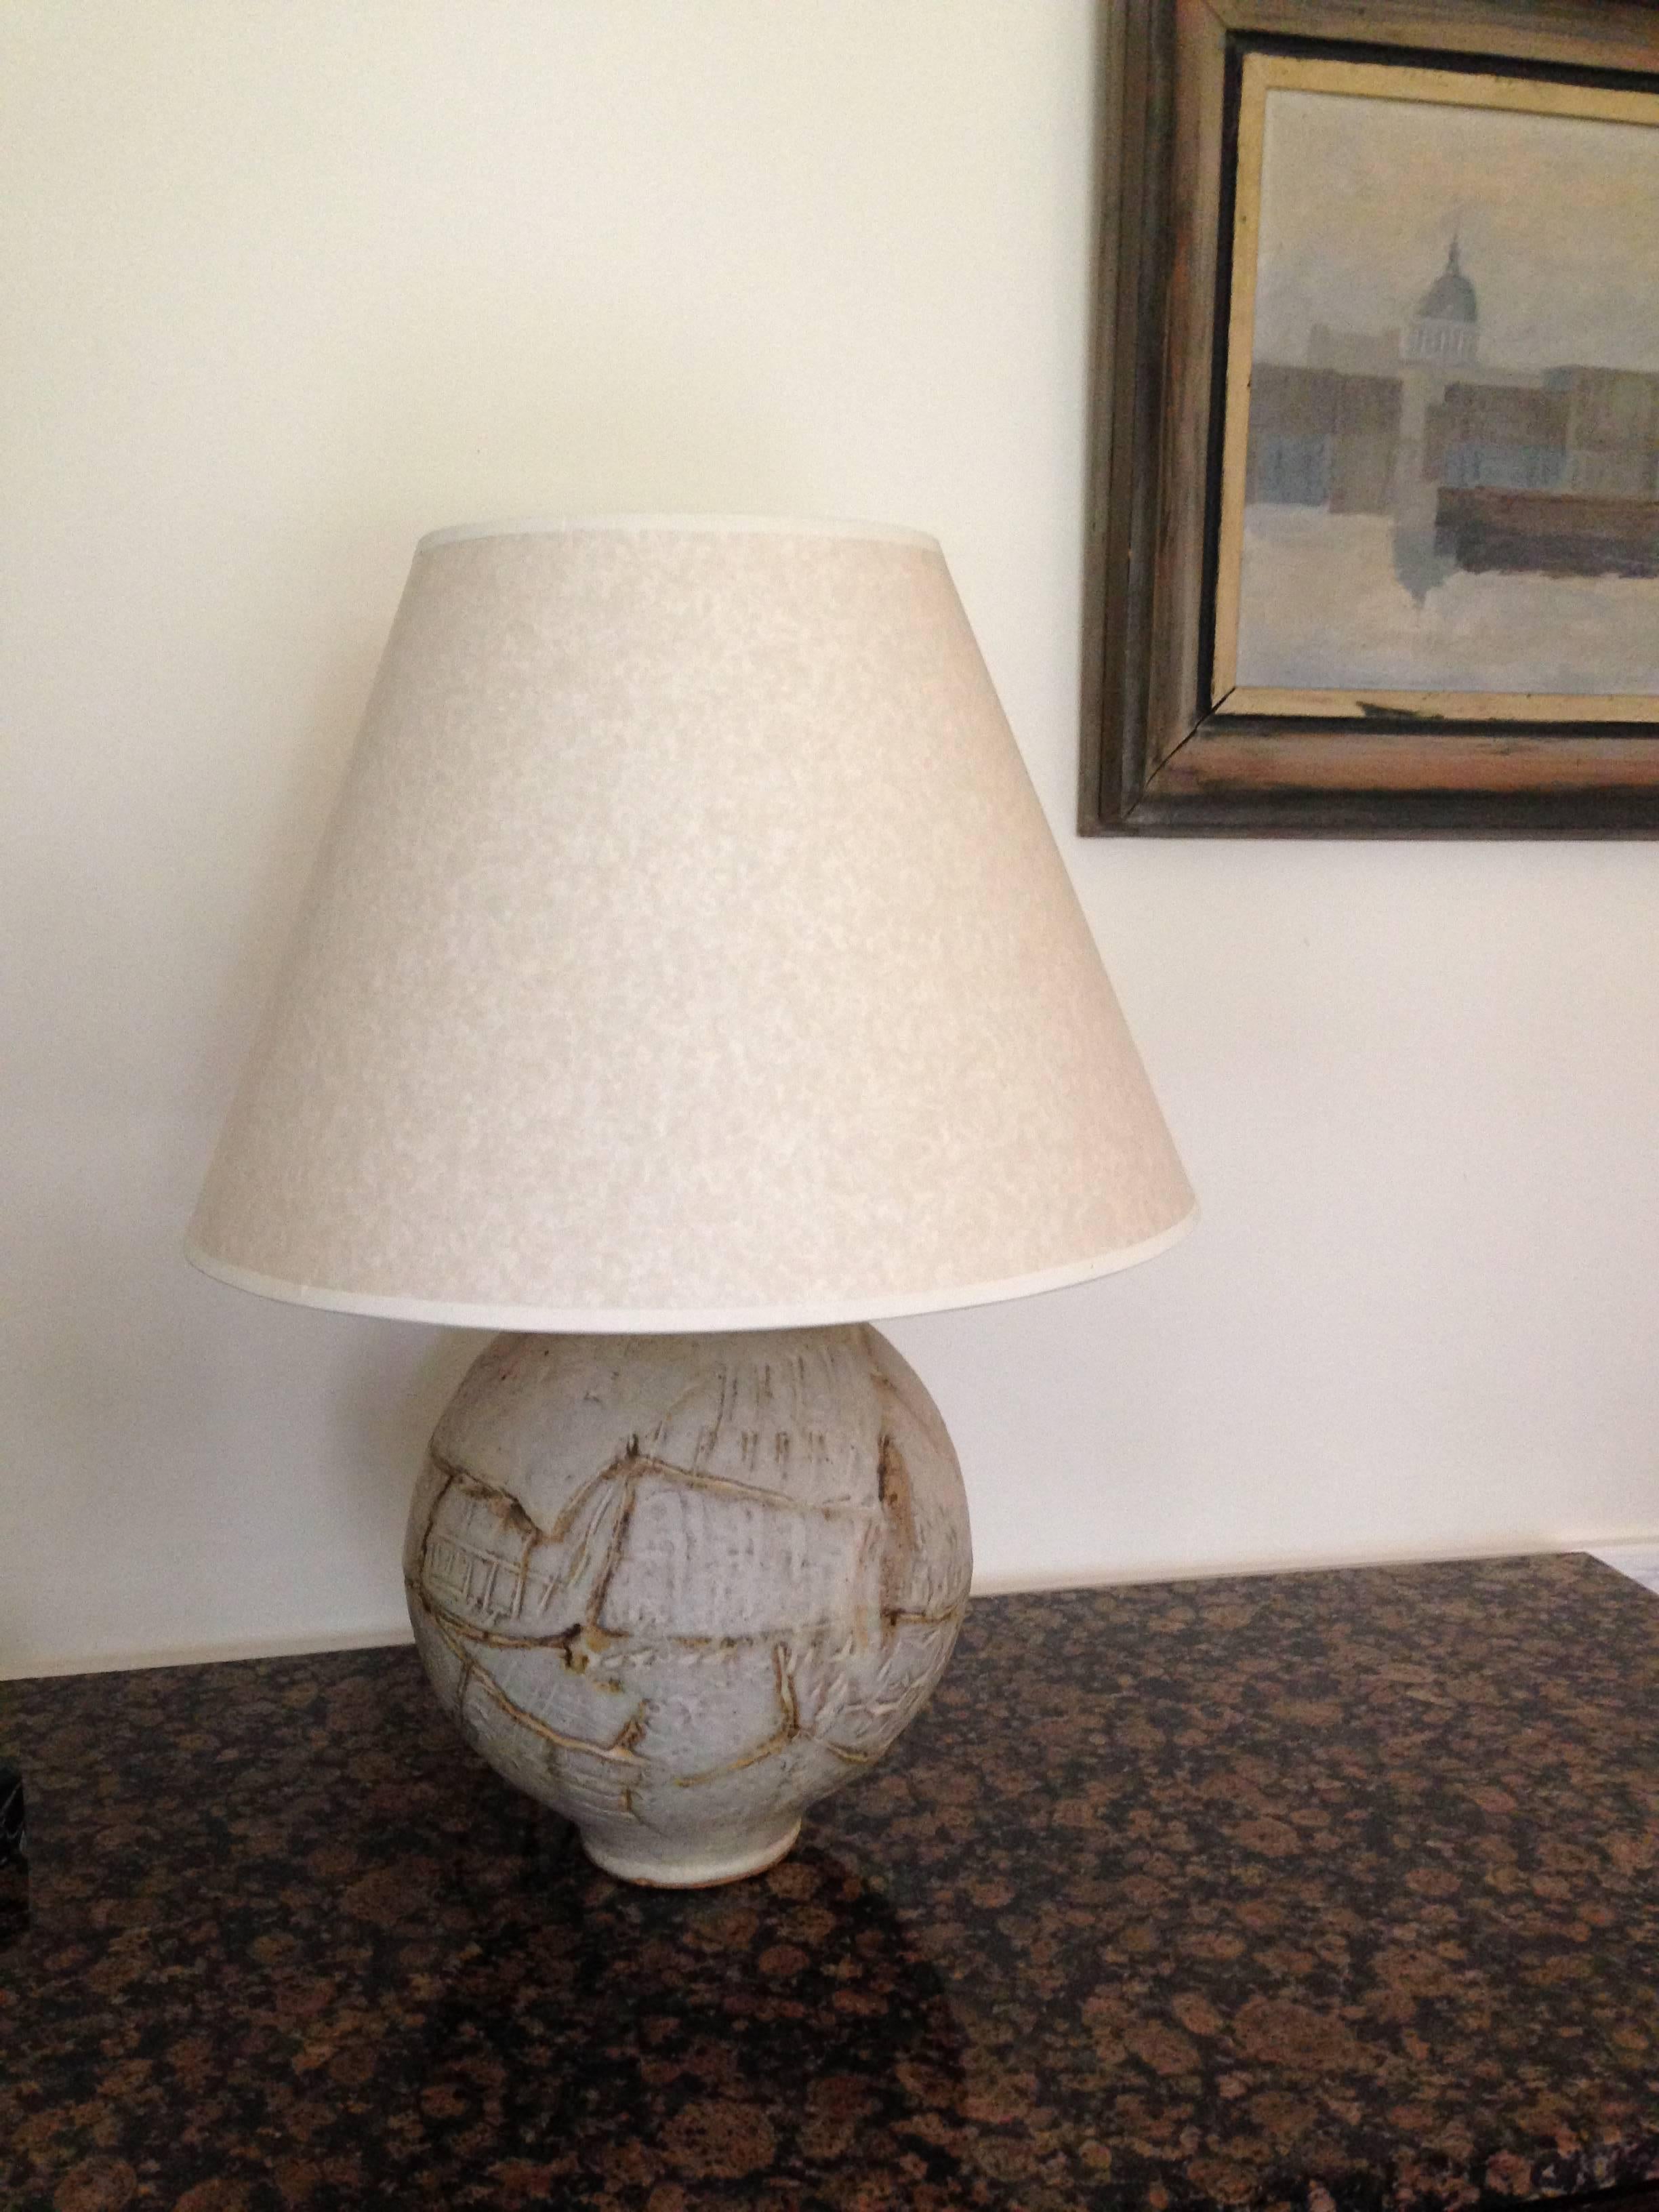 An interesting spherical heavy table lamp with incised abstract motifs.